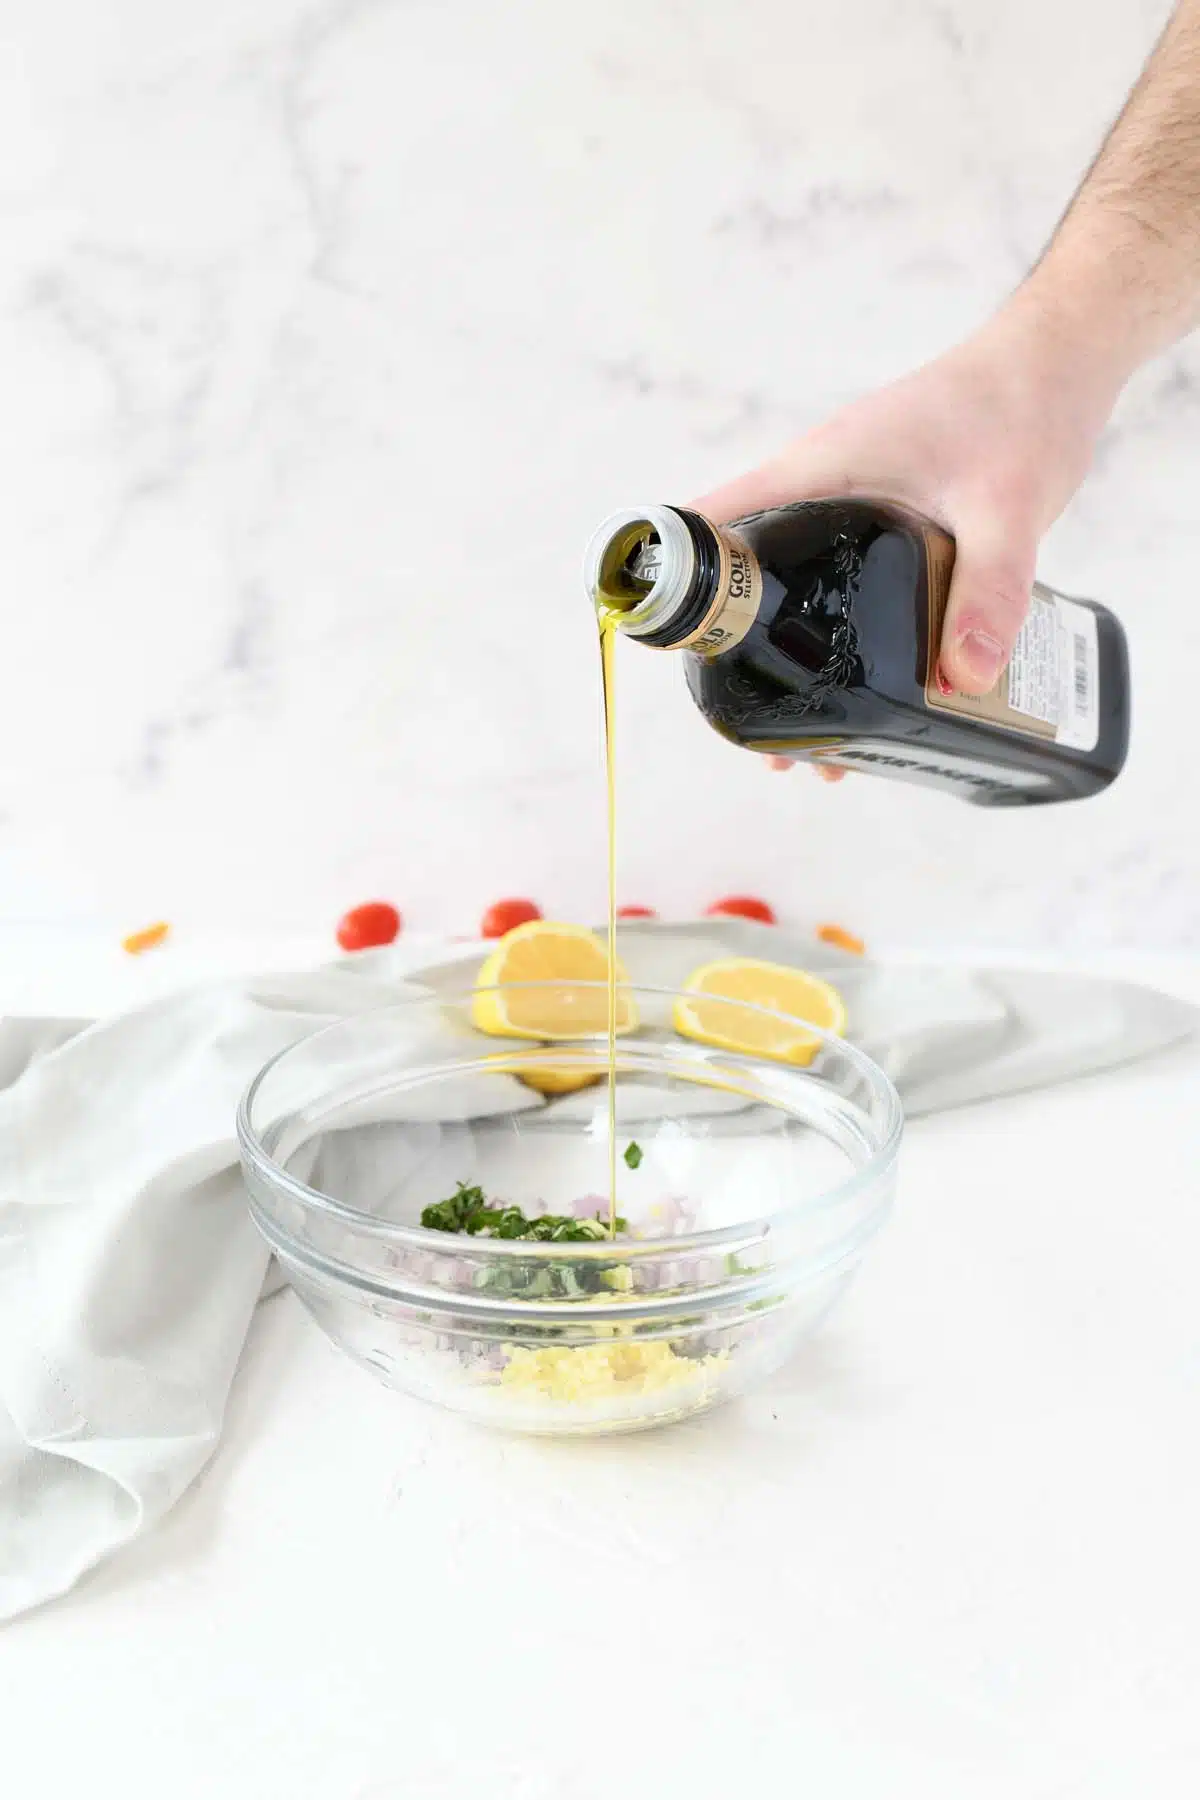 Pouring olive oil into a bowl of veggies.